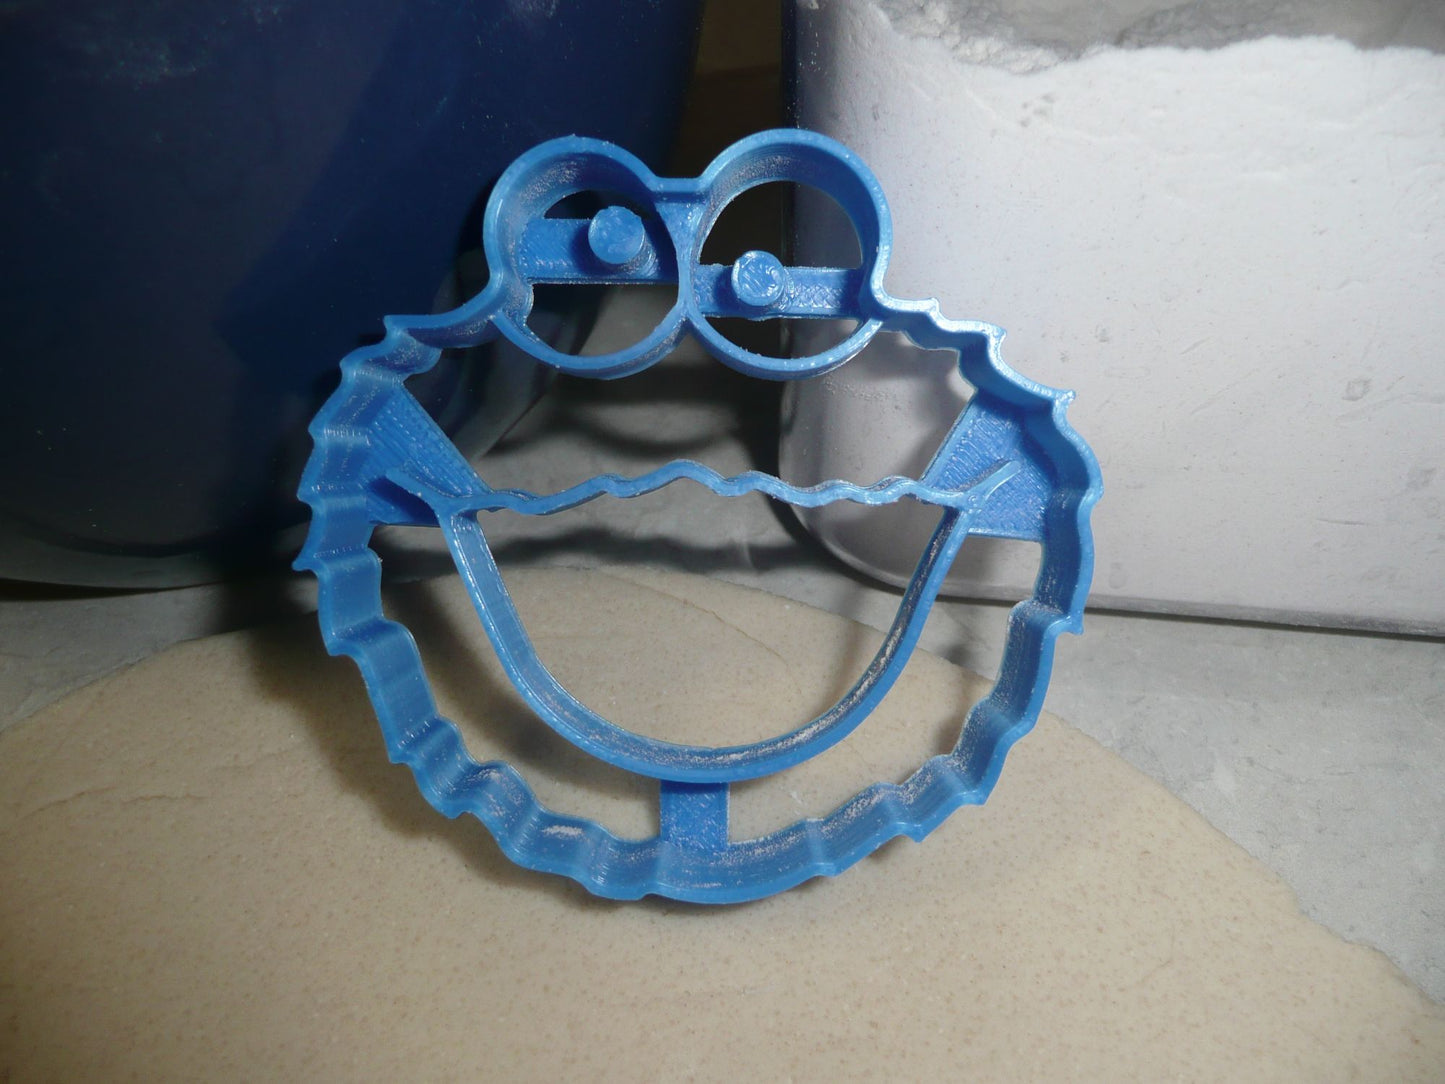 Cookie Monster Sesame Street Cookie Cutter Baking Tool Made In USA PR546